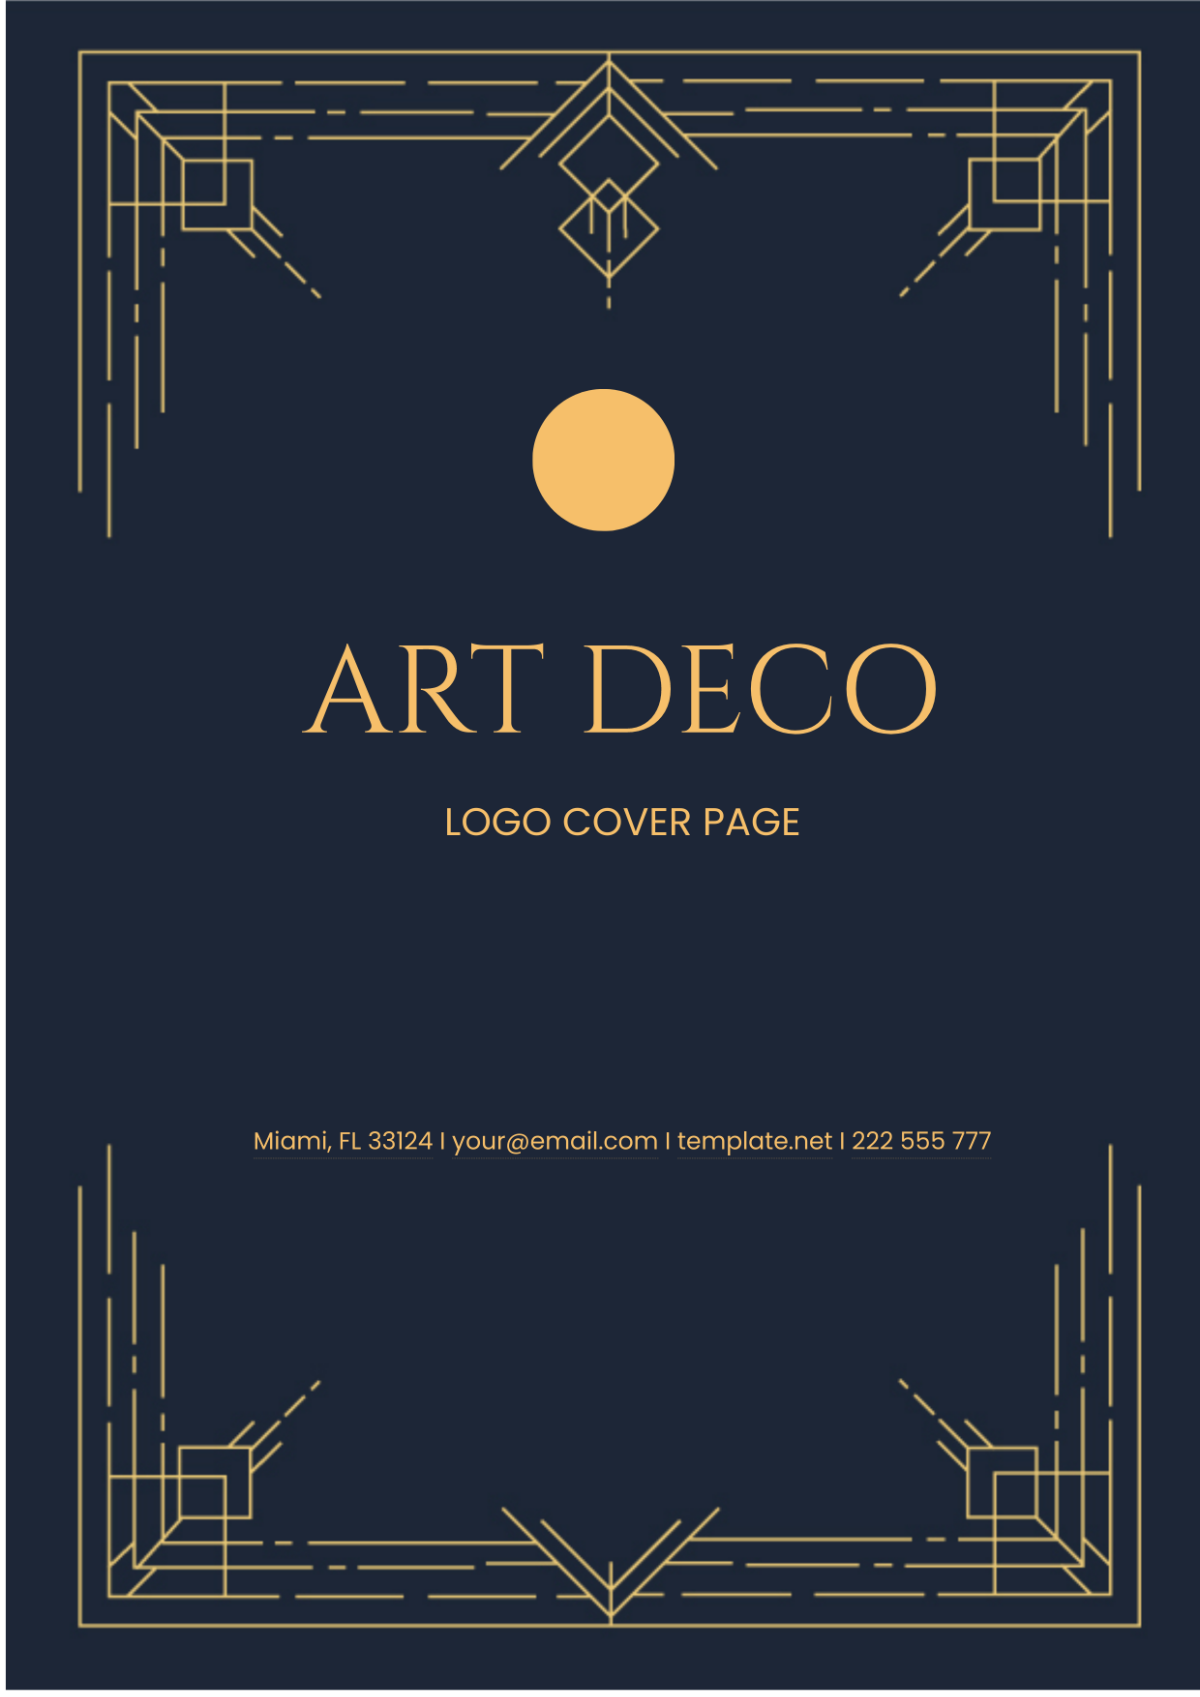 Free Art Deco Logo Cover Page Template